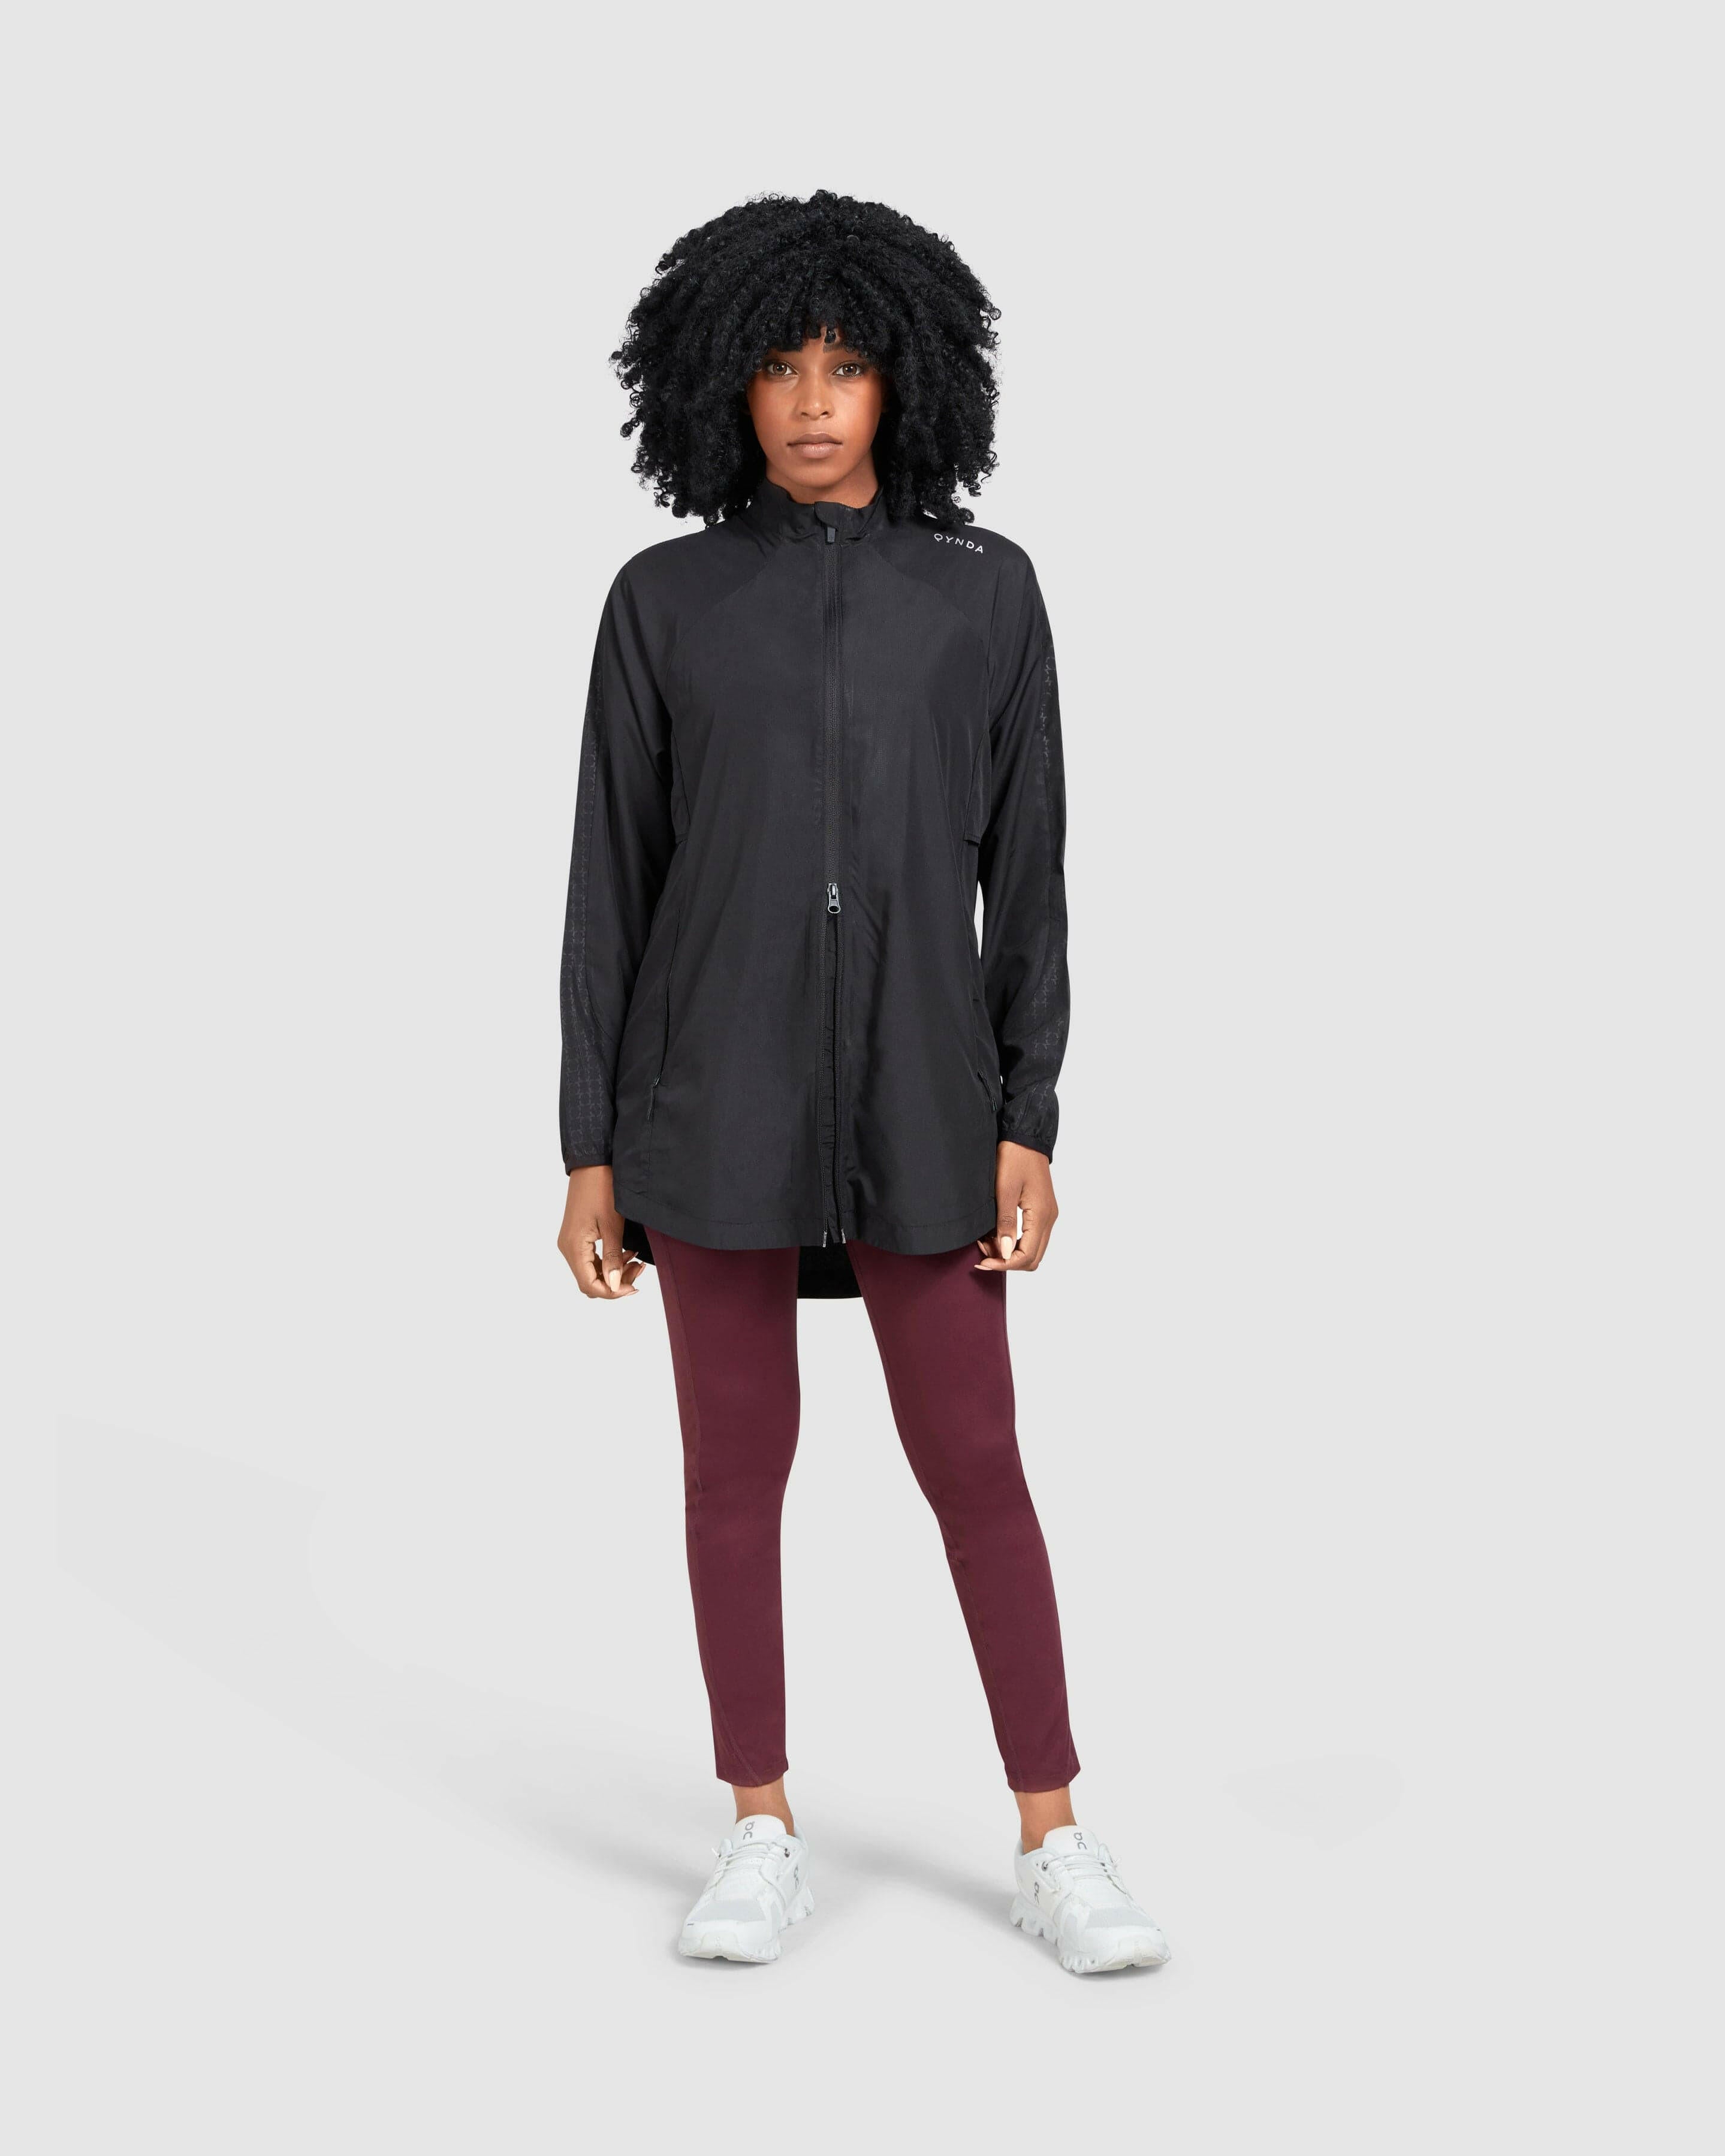 A confident model in a black FLY JACKET by Qynda made of super light fabric and maroon leggings designed for a bigger motion range, paired with casual white sneakers, standing against a neutral background with a focused gaze.